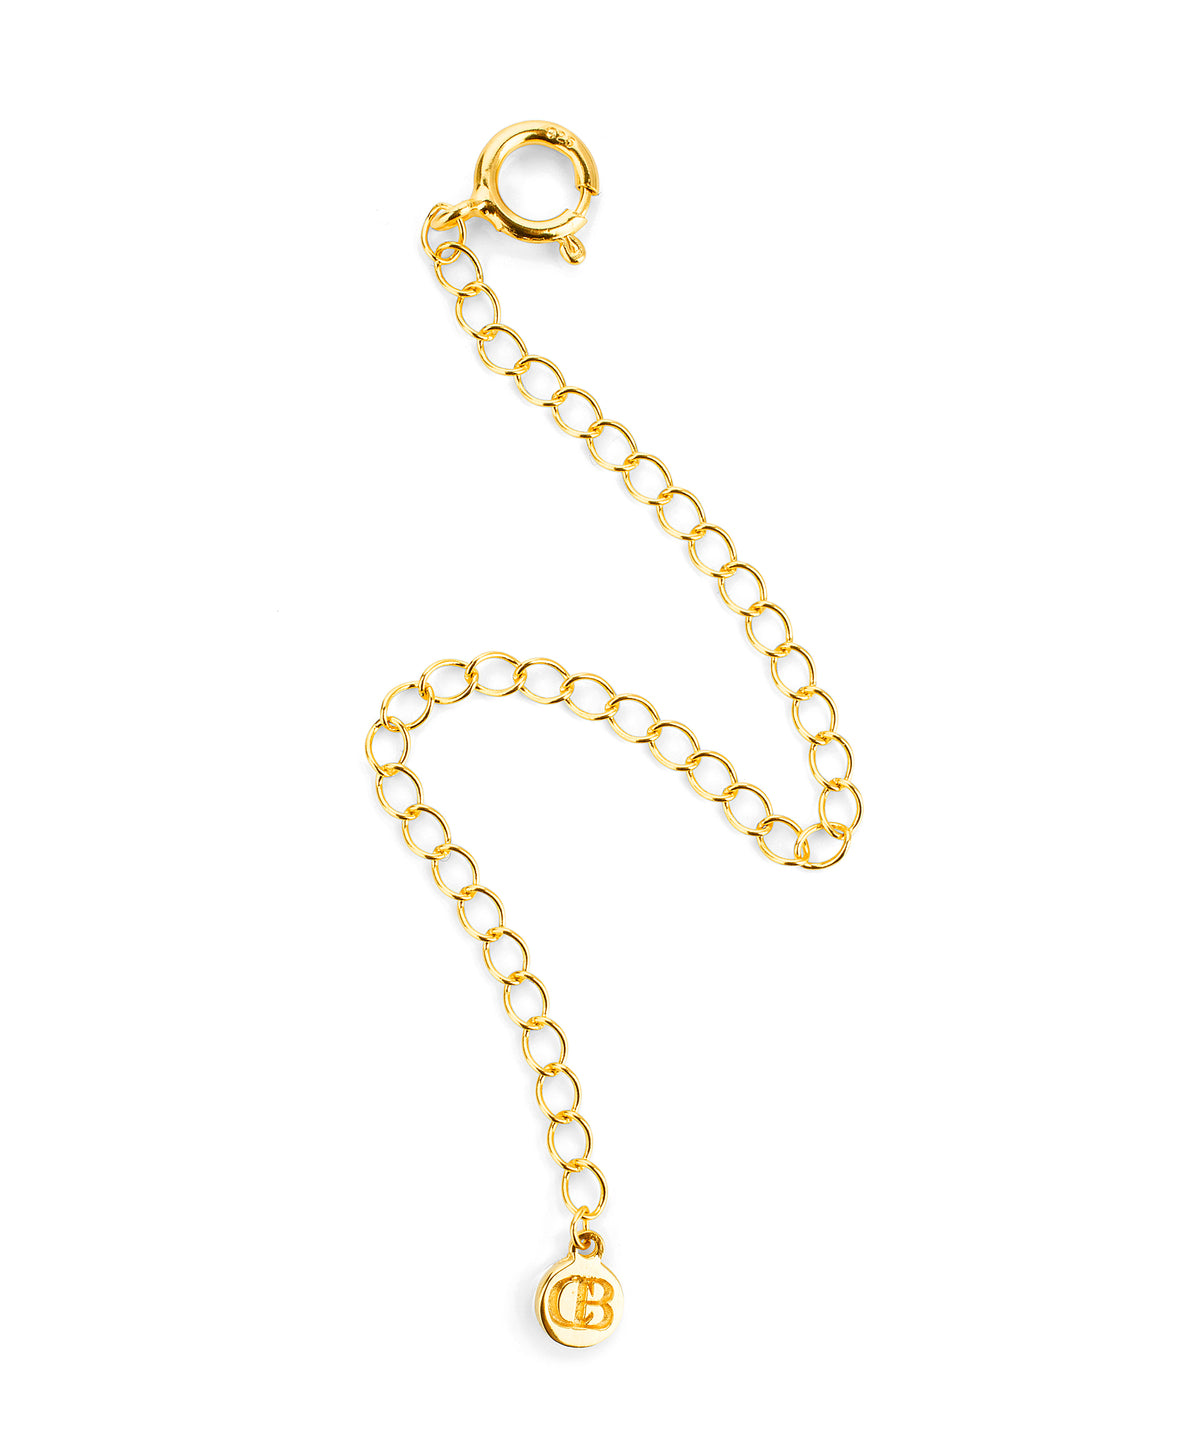 Gold plated Sterling Silver chain extender